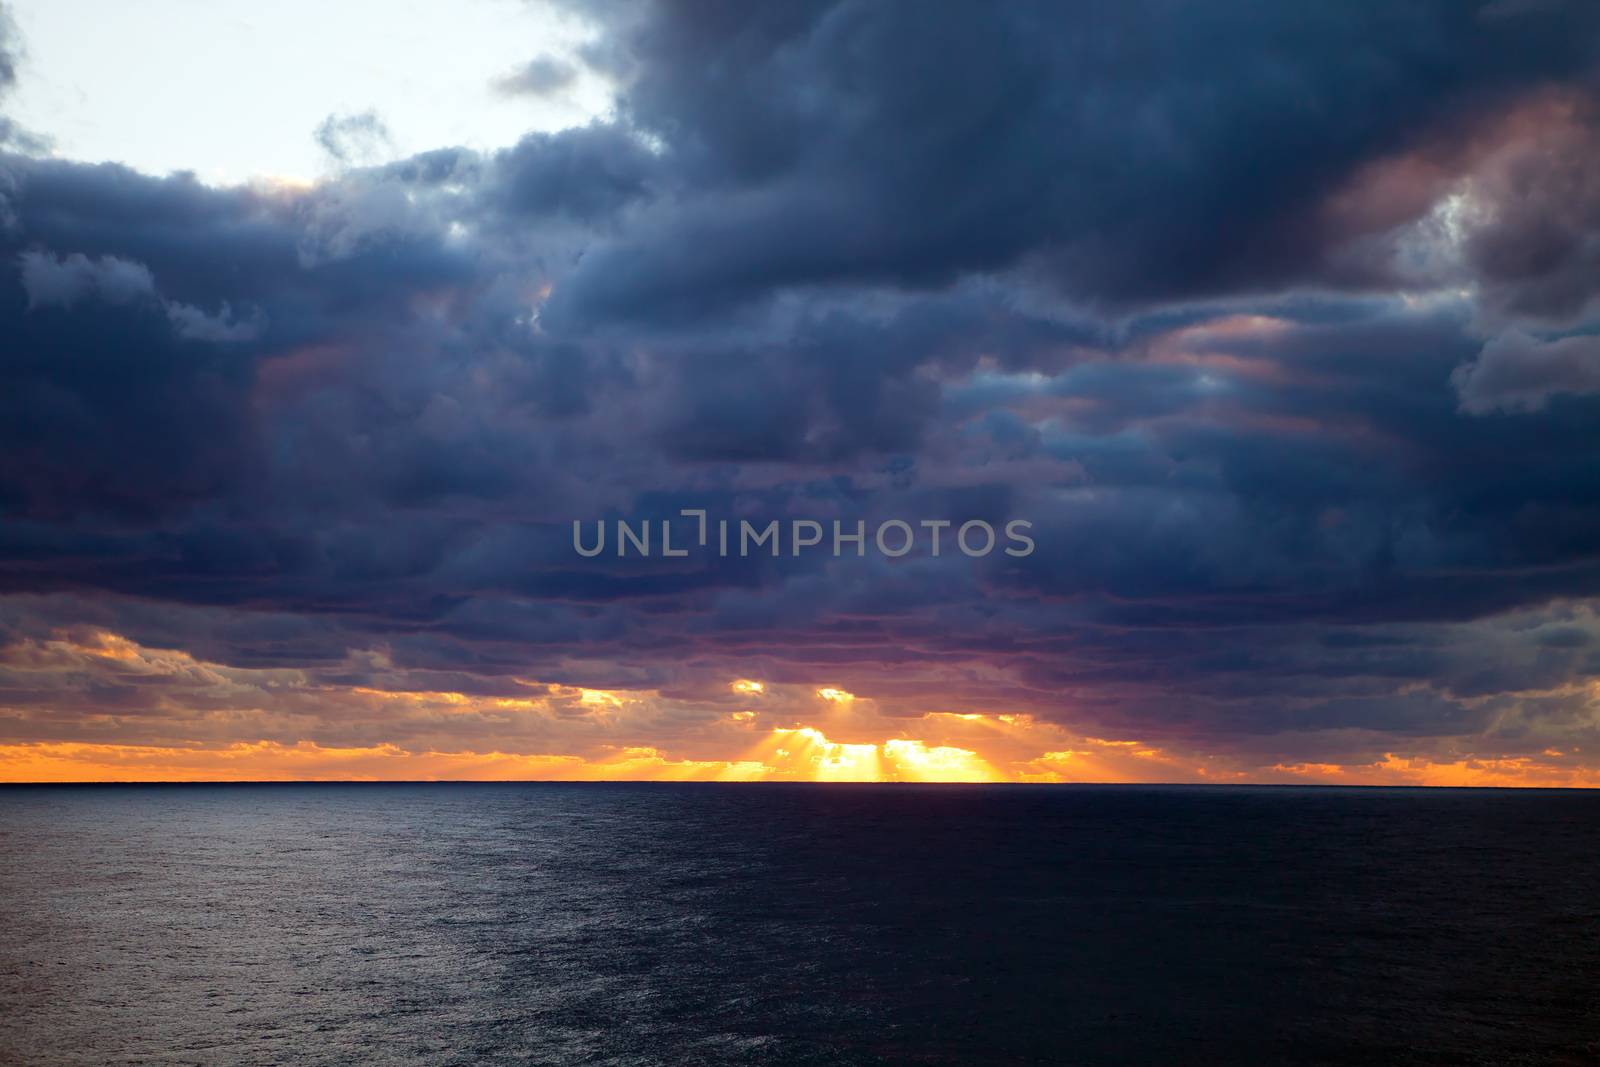 Sunset Over a Cloudy Atlantic by graficallyminded